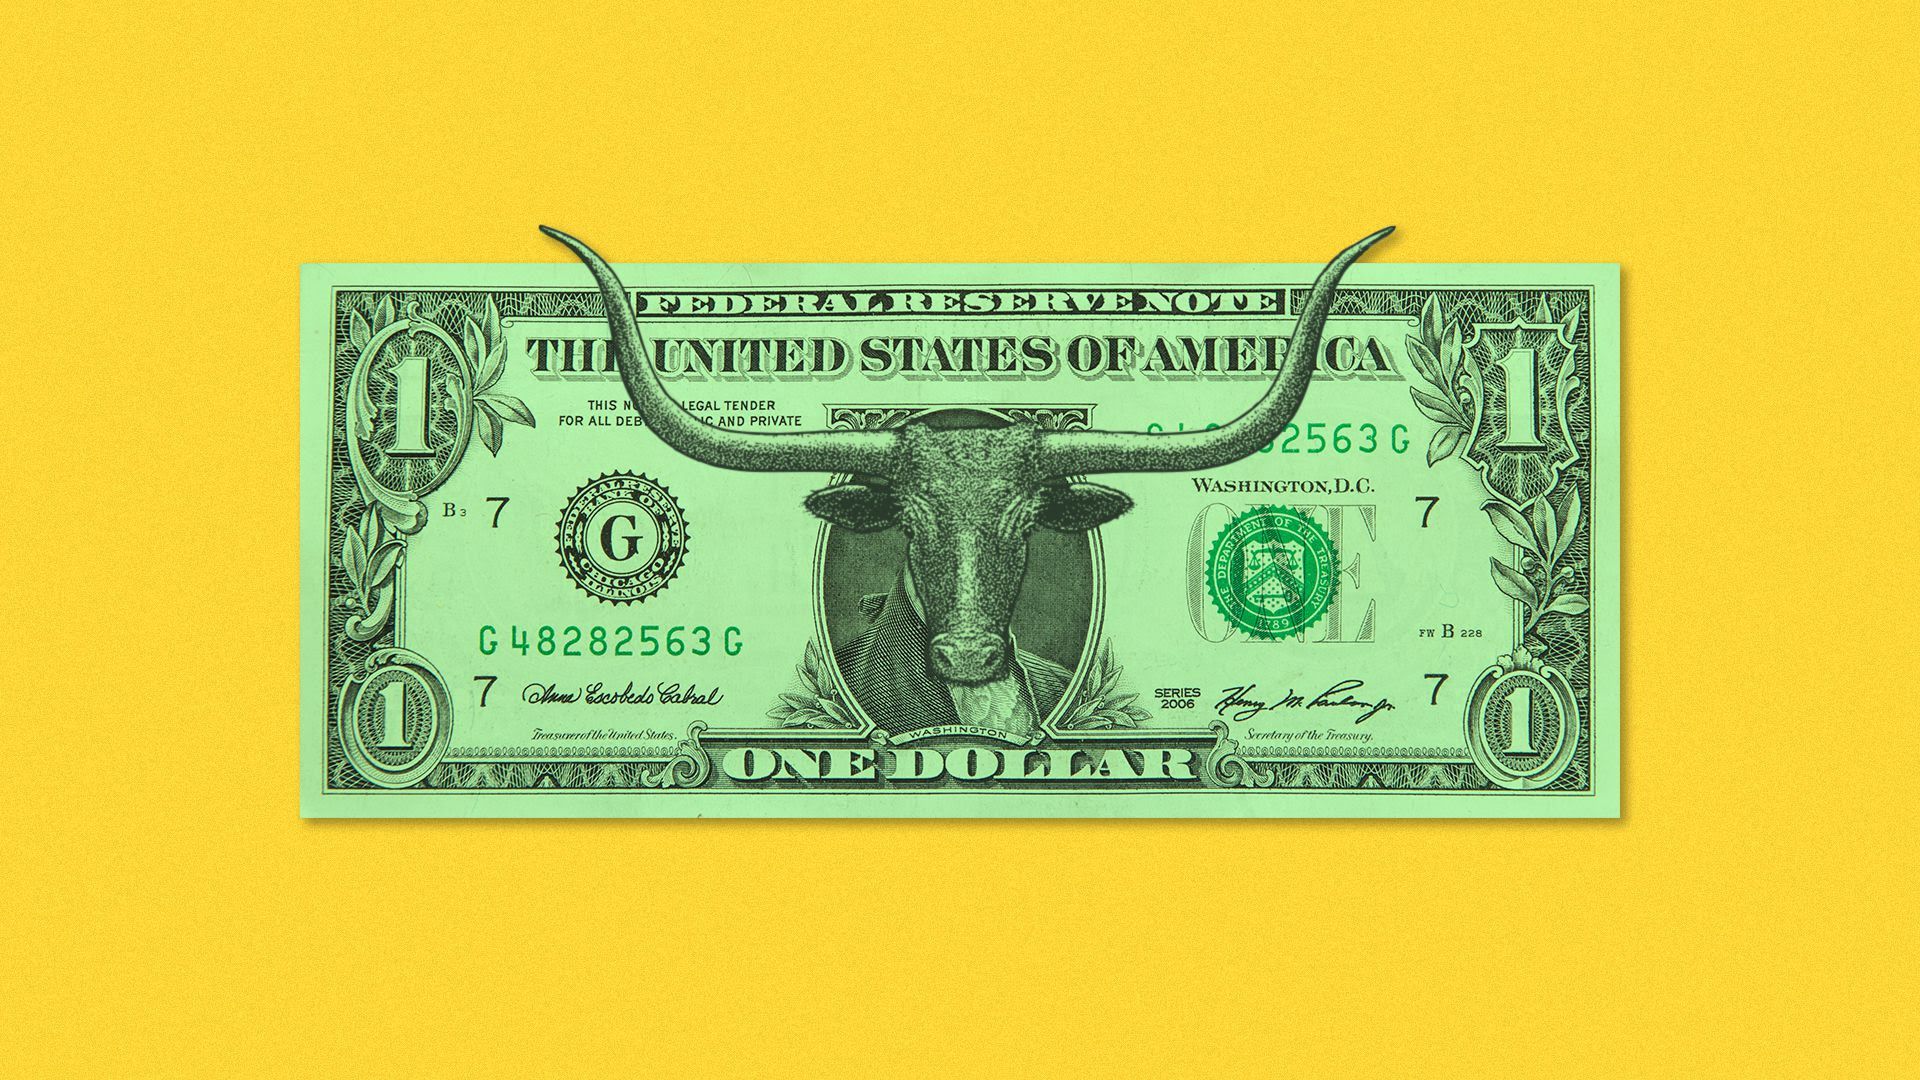 Illustration of a bull on the dollar bill in the place of a president